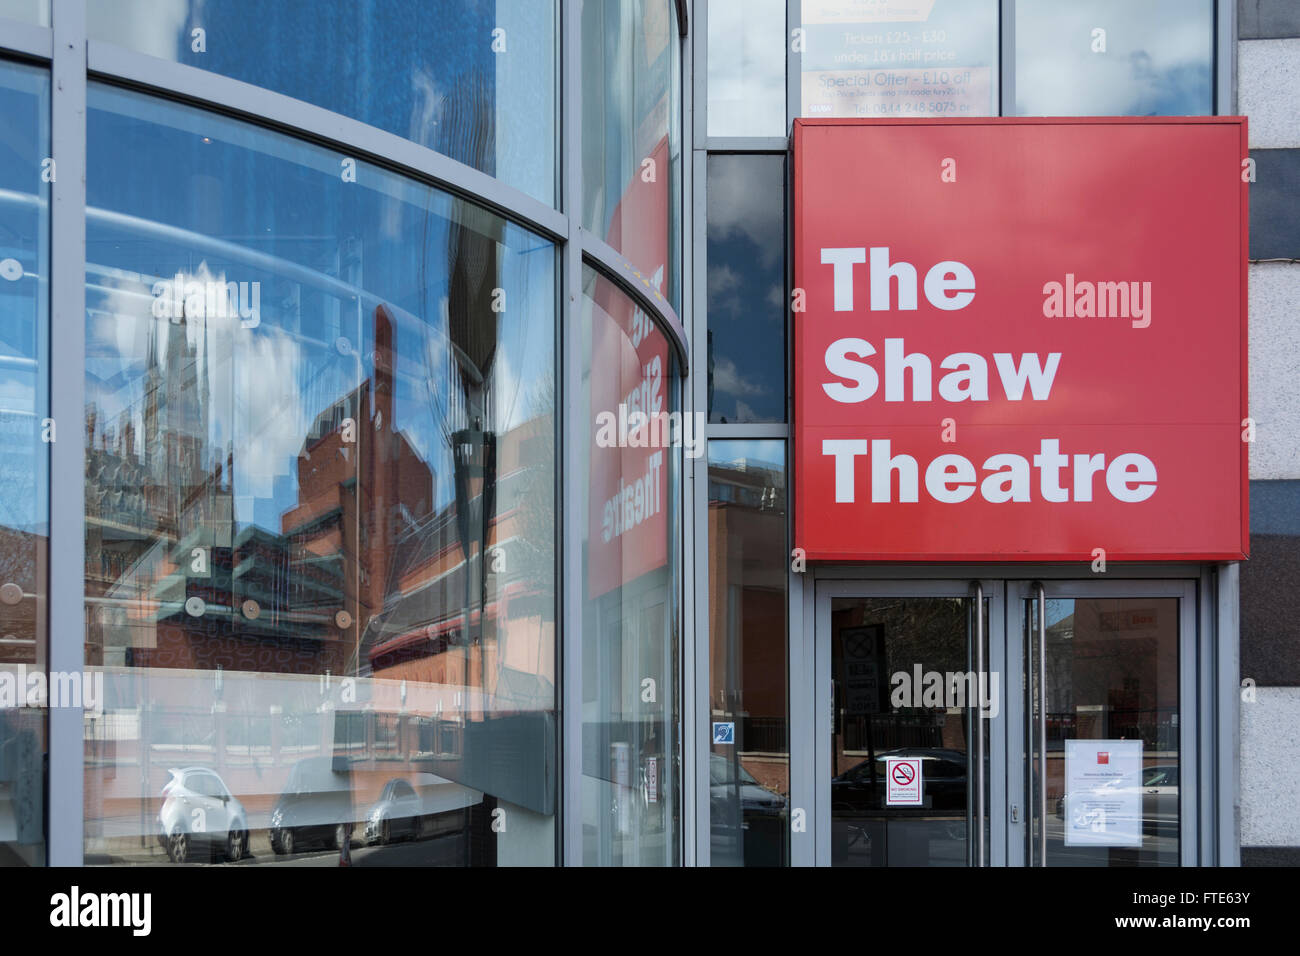 The British Library and St. Pancras railway station reflected in the window of the Shaw Theatre, Euston Road, London, UK Stock Photo